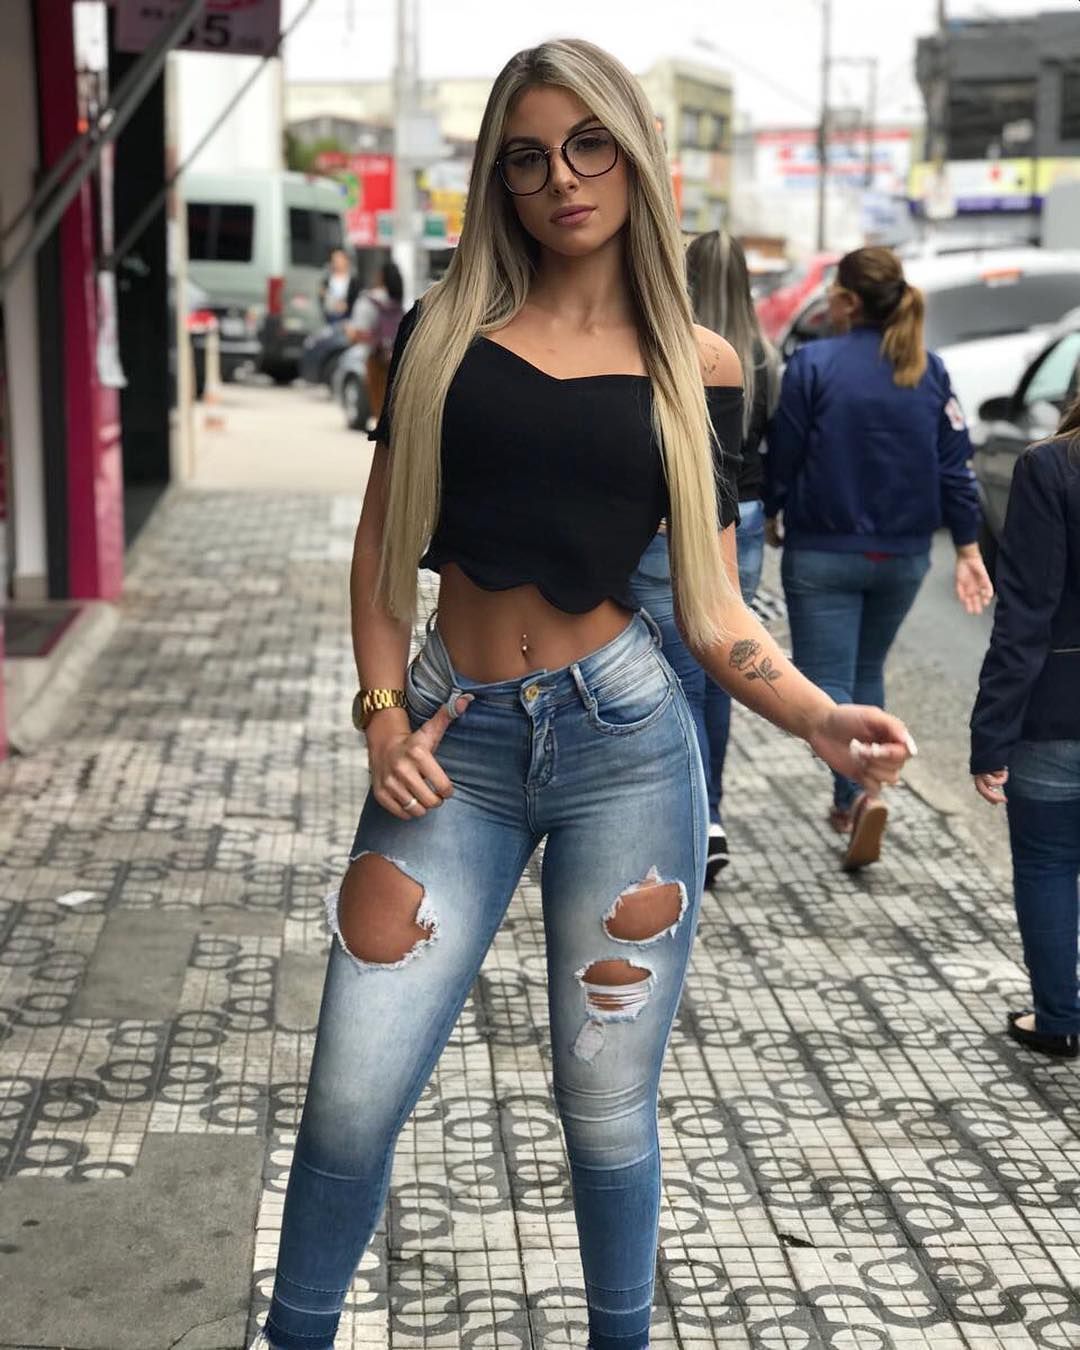 Russian Chick With Tight Jeans Porno Fotos Eporner